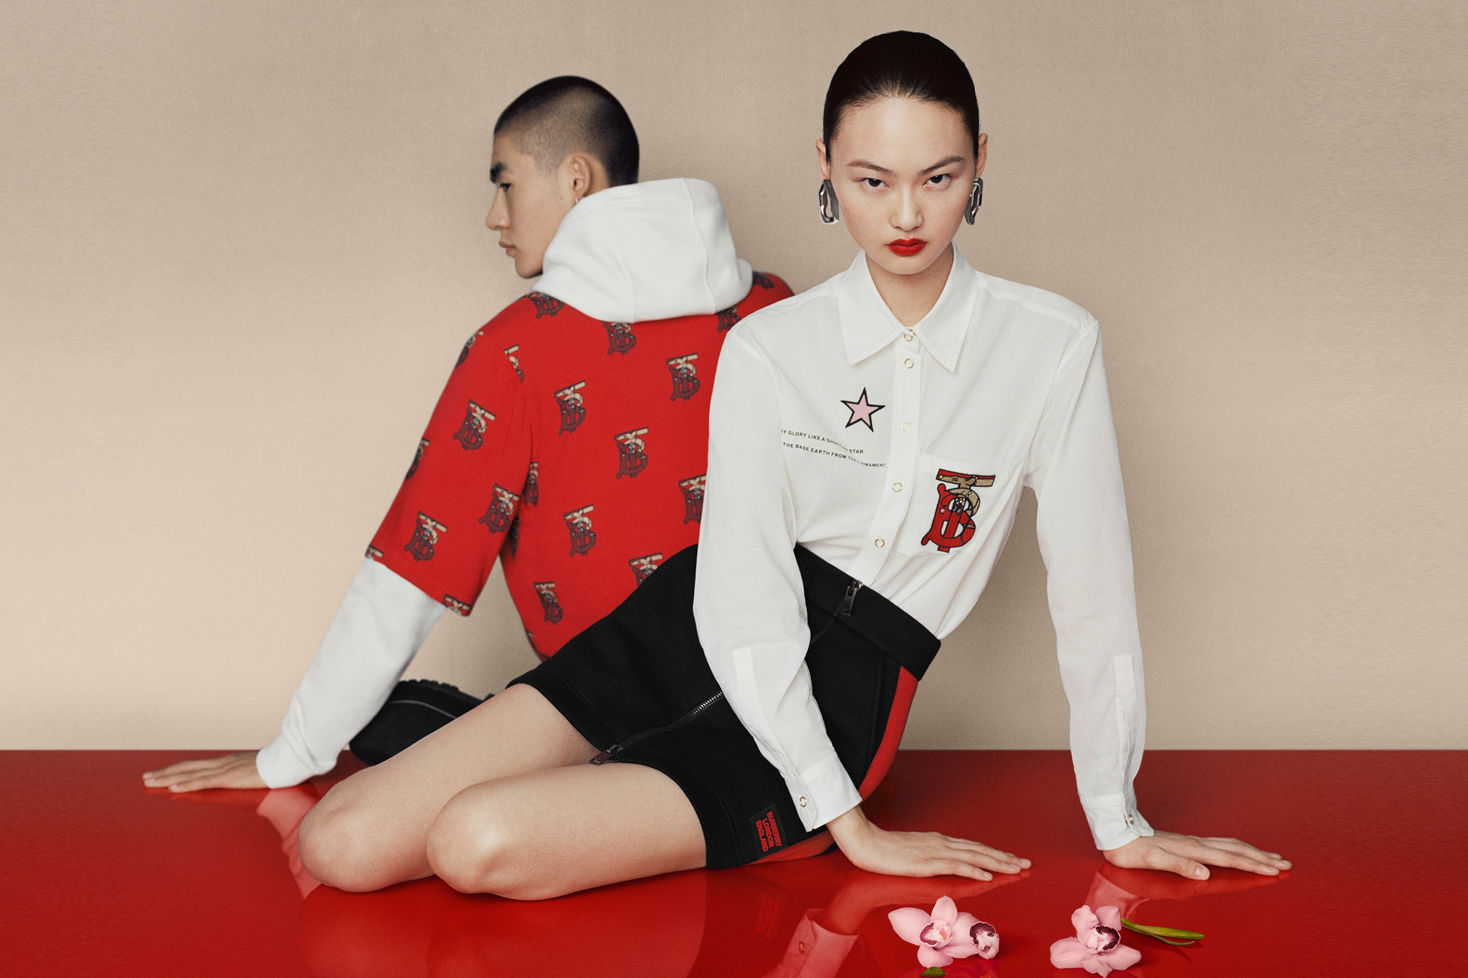 Gucci teams up with Mickey Mouse ahead of the 2020 Lunar New Year